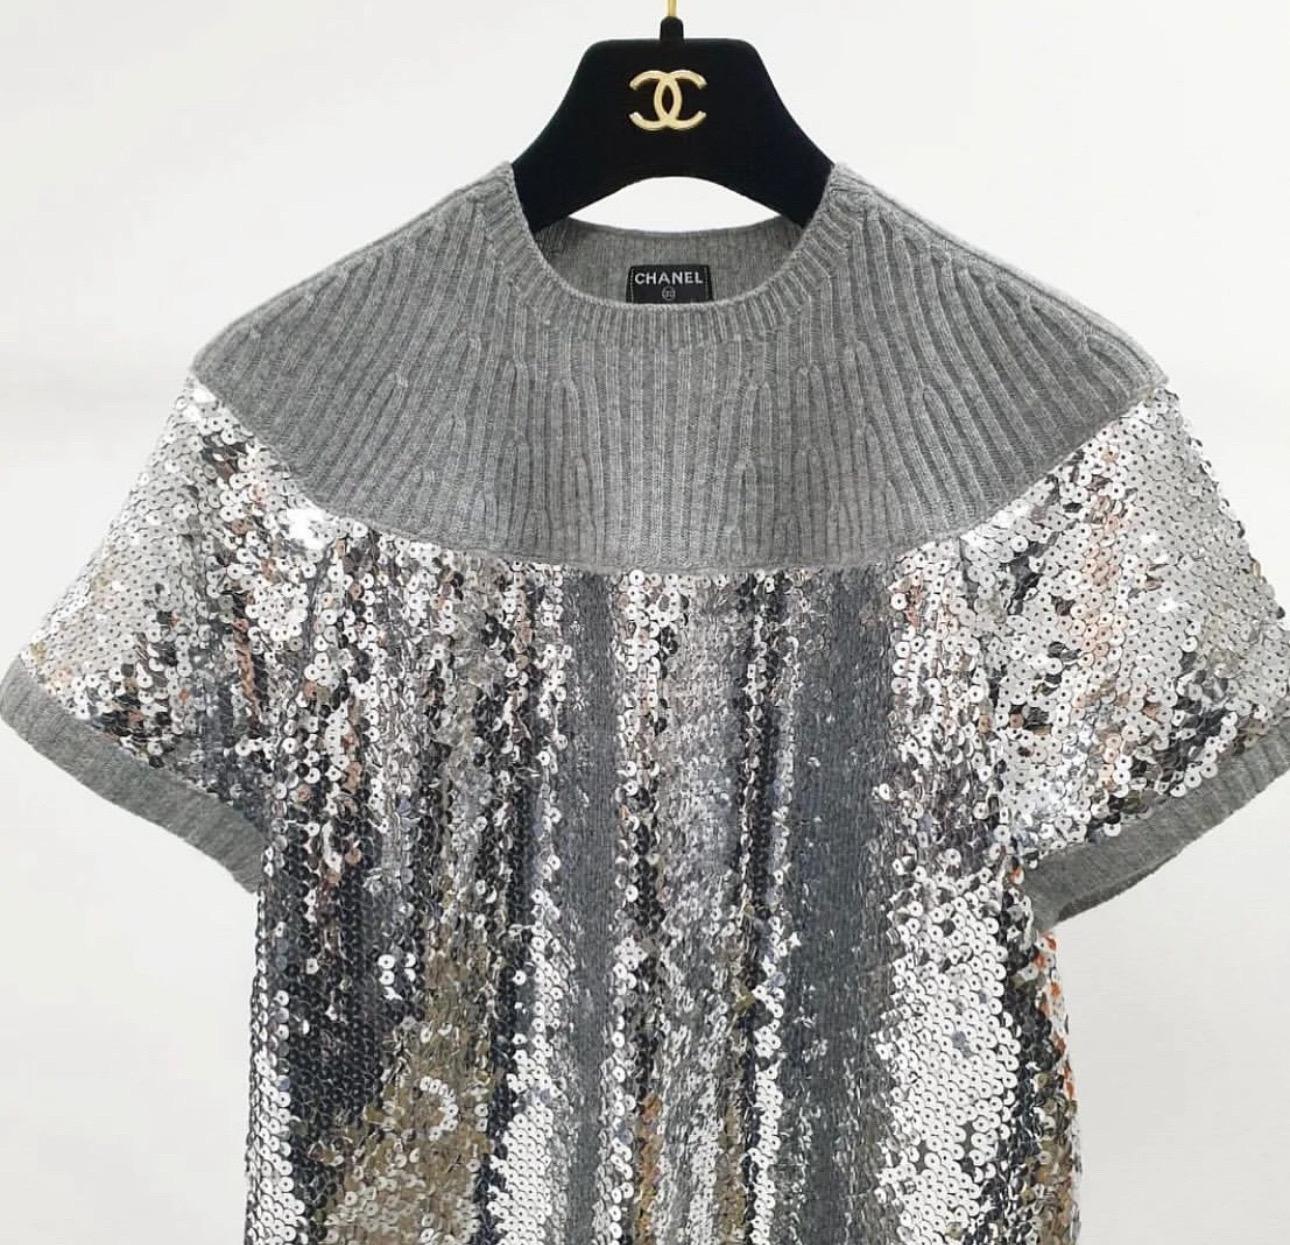  From the Fall 2008 Collection
Silver-tone Chanel sequin knit sweater with crew neck and short sleeves.
Sz.38
Excellent condition.